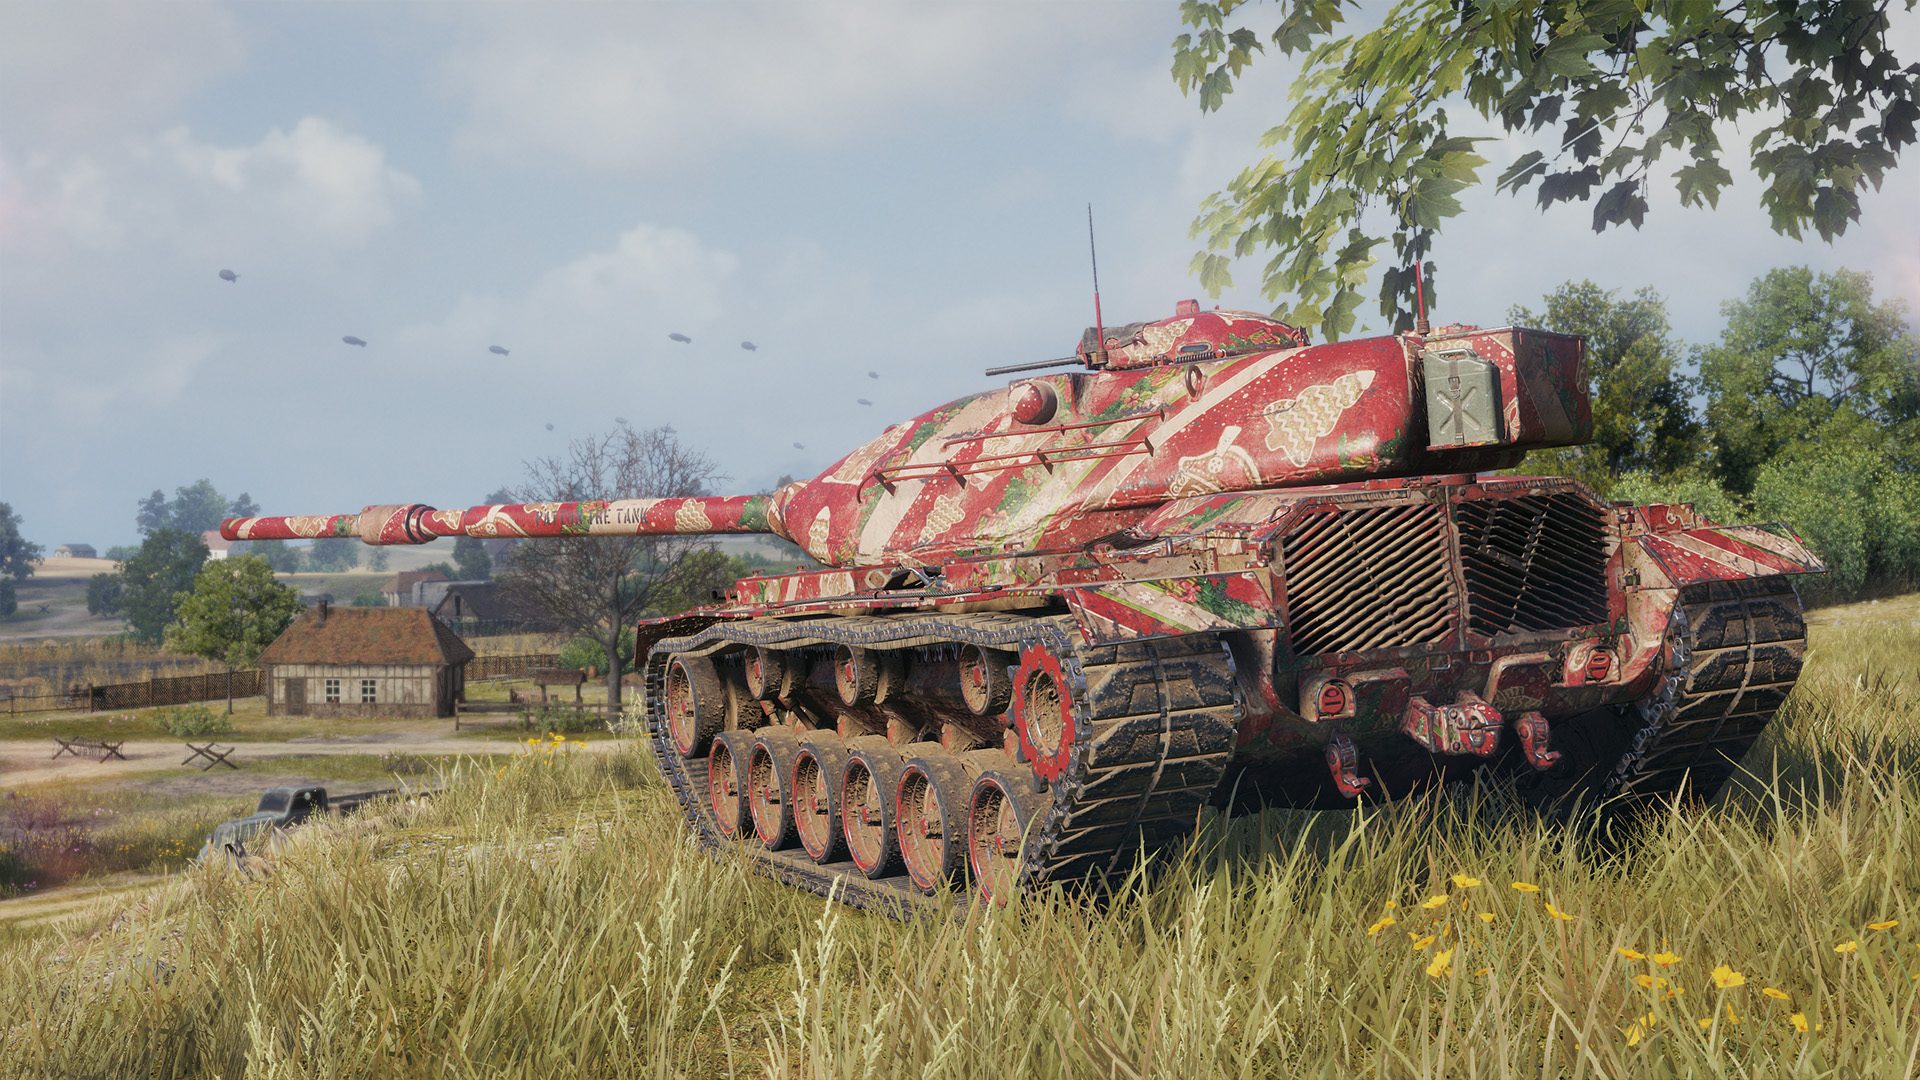 World of Tanks and Vinnie Jones pumped up the Gaming tariff: two